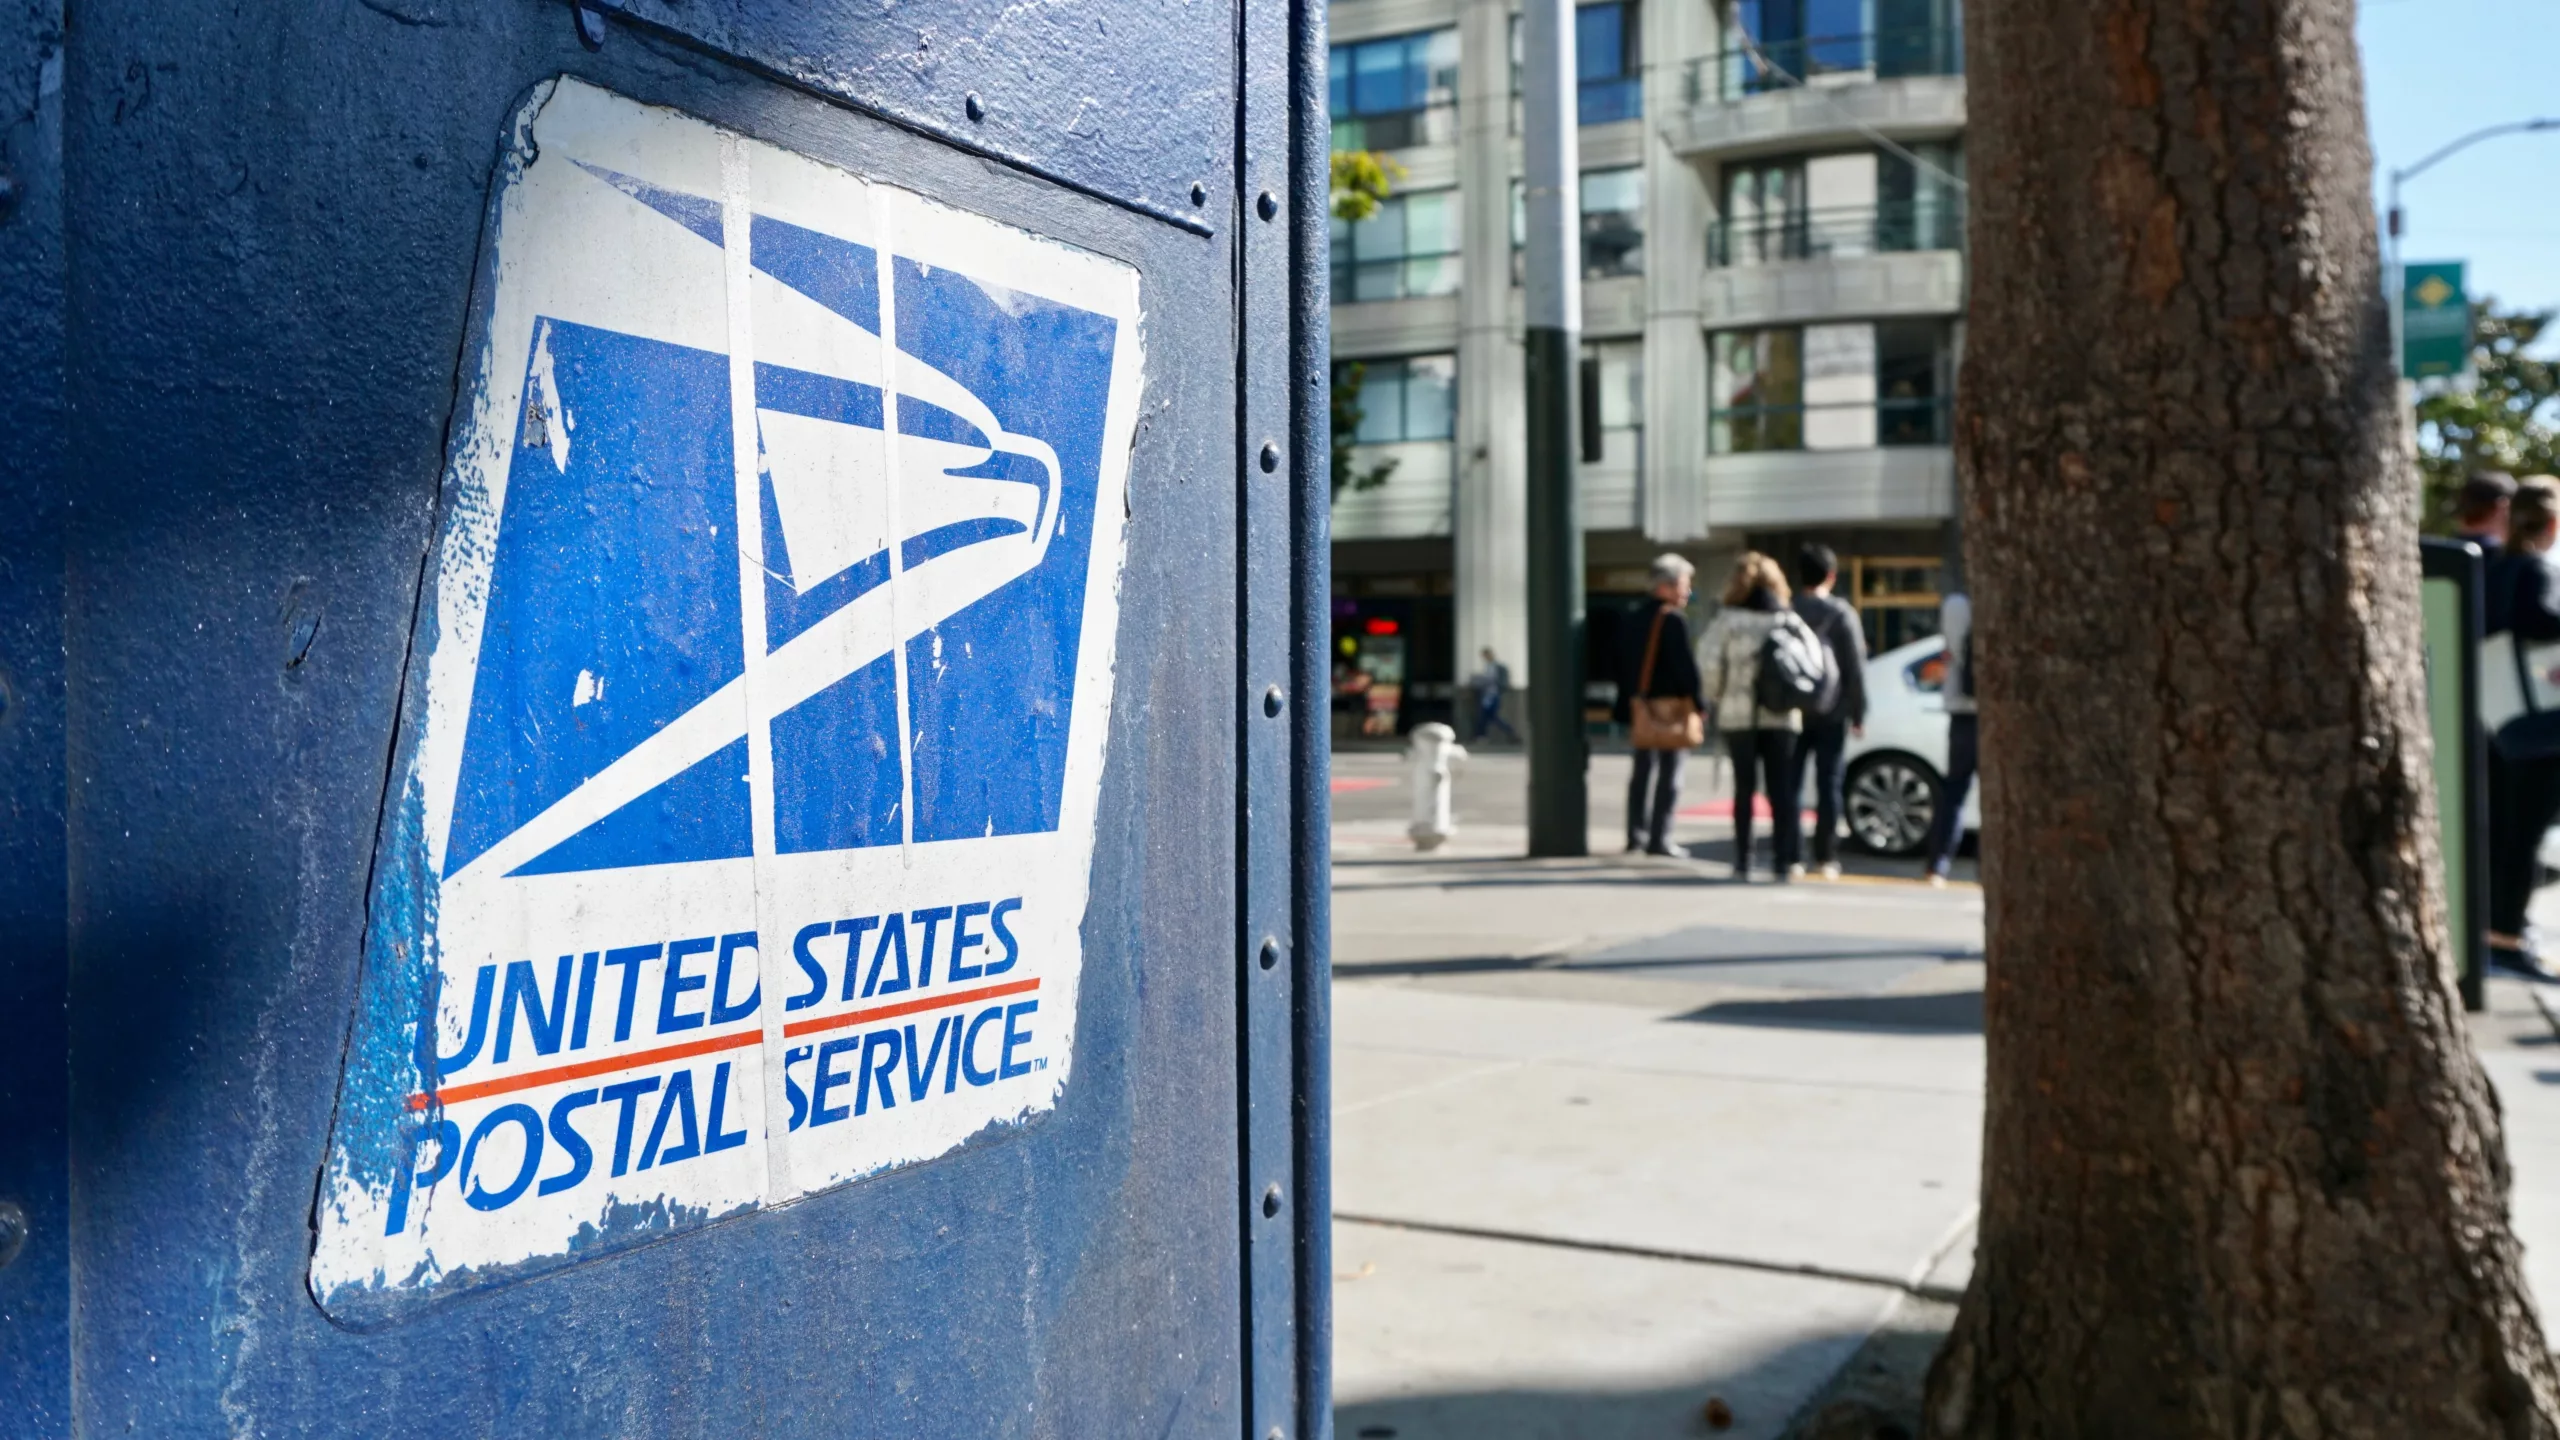 Deciphering the News About the U.S. Postal Service